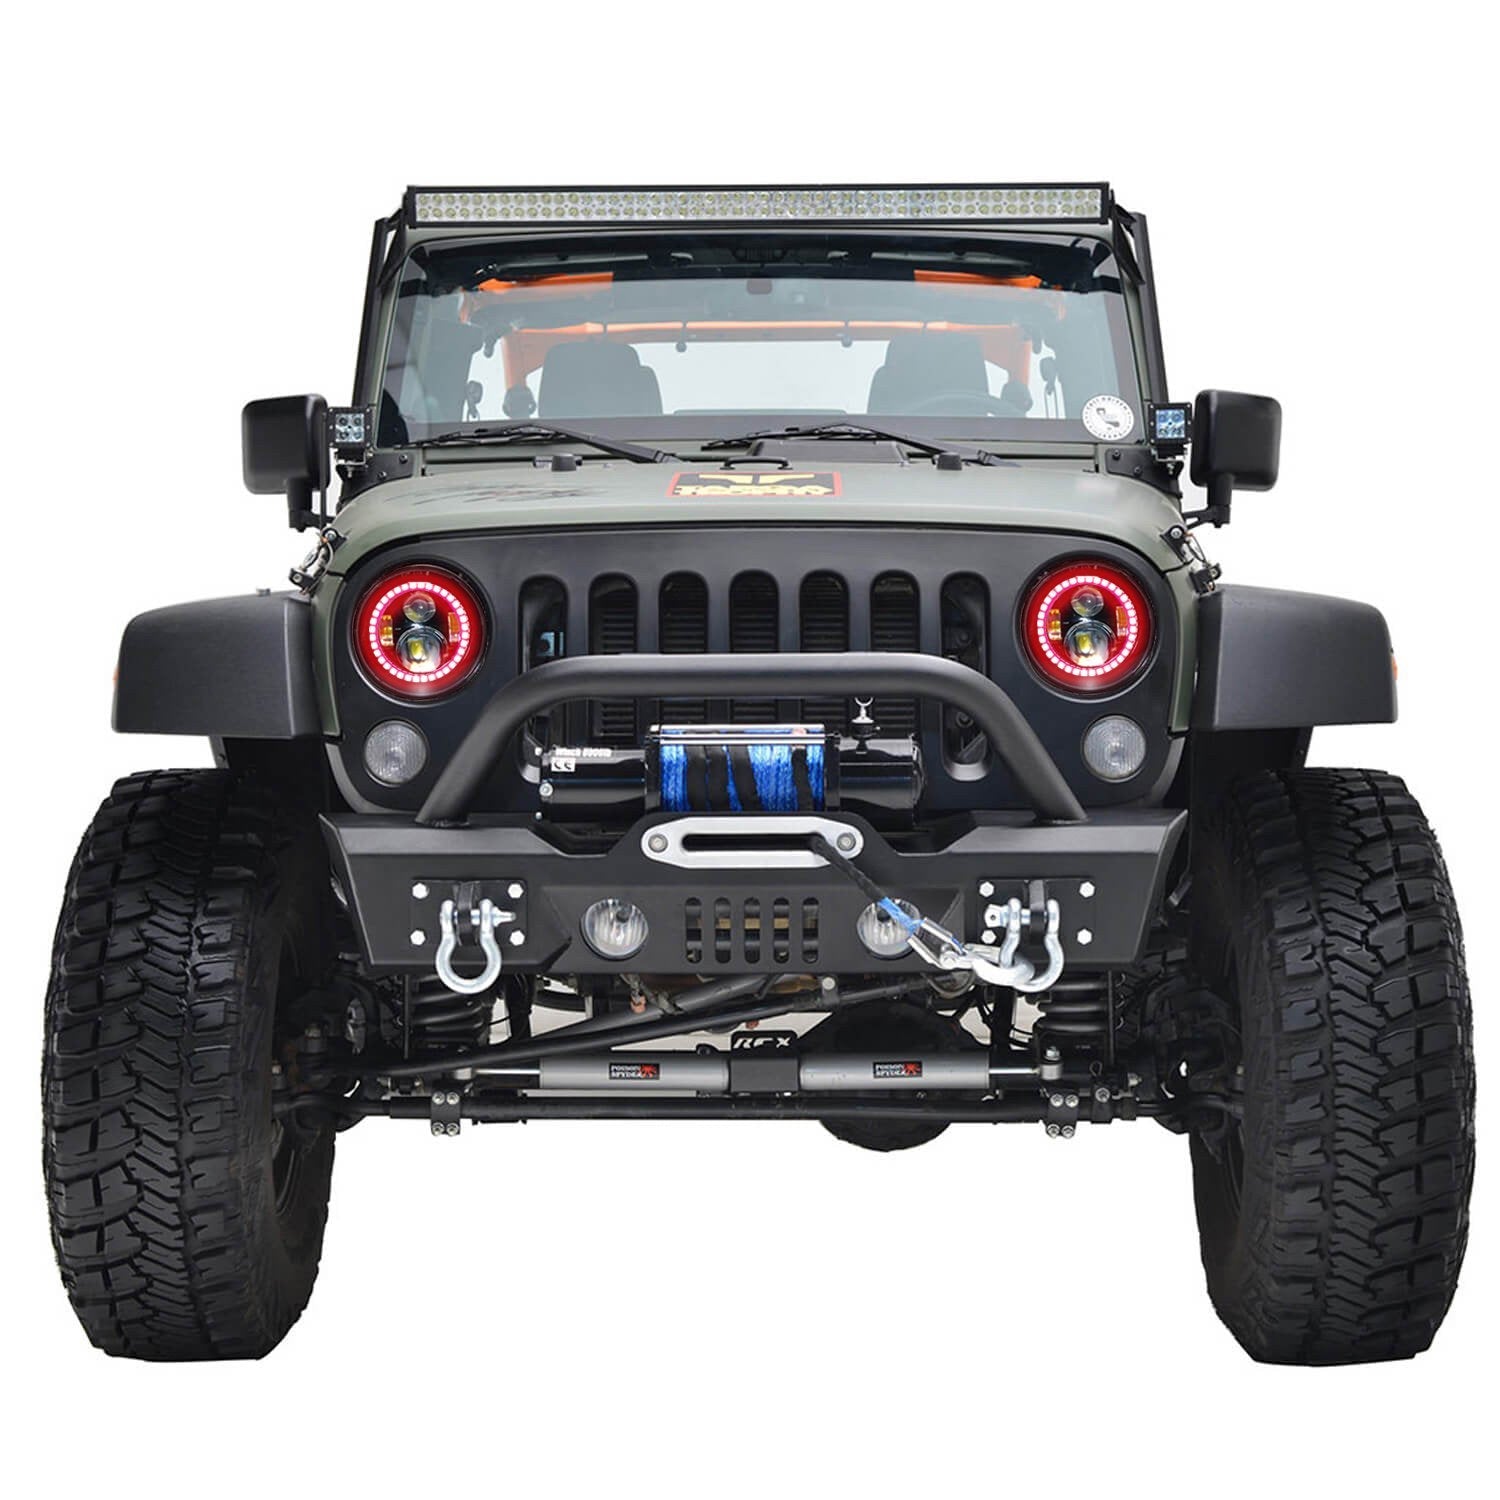 Jeep-Wrangler-2007, 2008, 2009, 2010, 2011, 2012, 2013, 2014, 2015, 2016, 2017-LED-Halo-Headlights-ColorChase-No Remote-7inch-LEDprojector-CCH